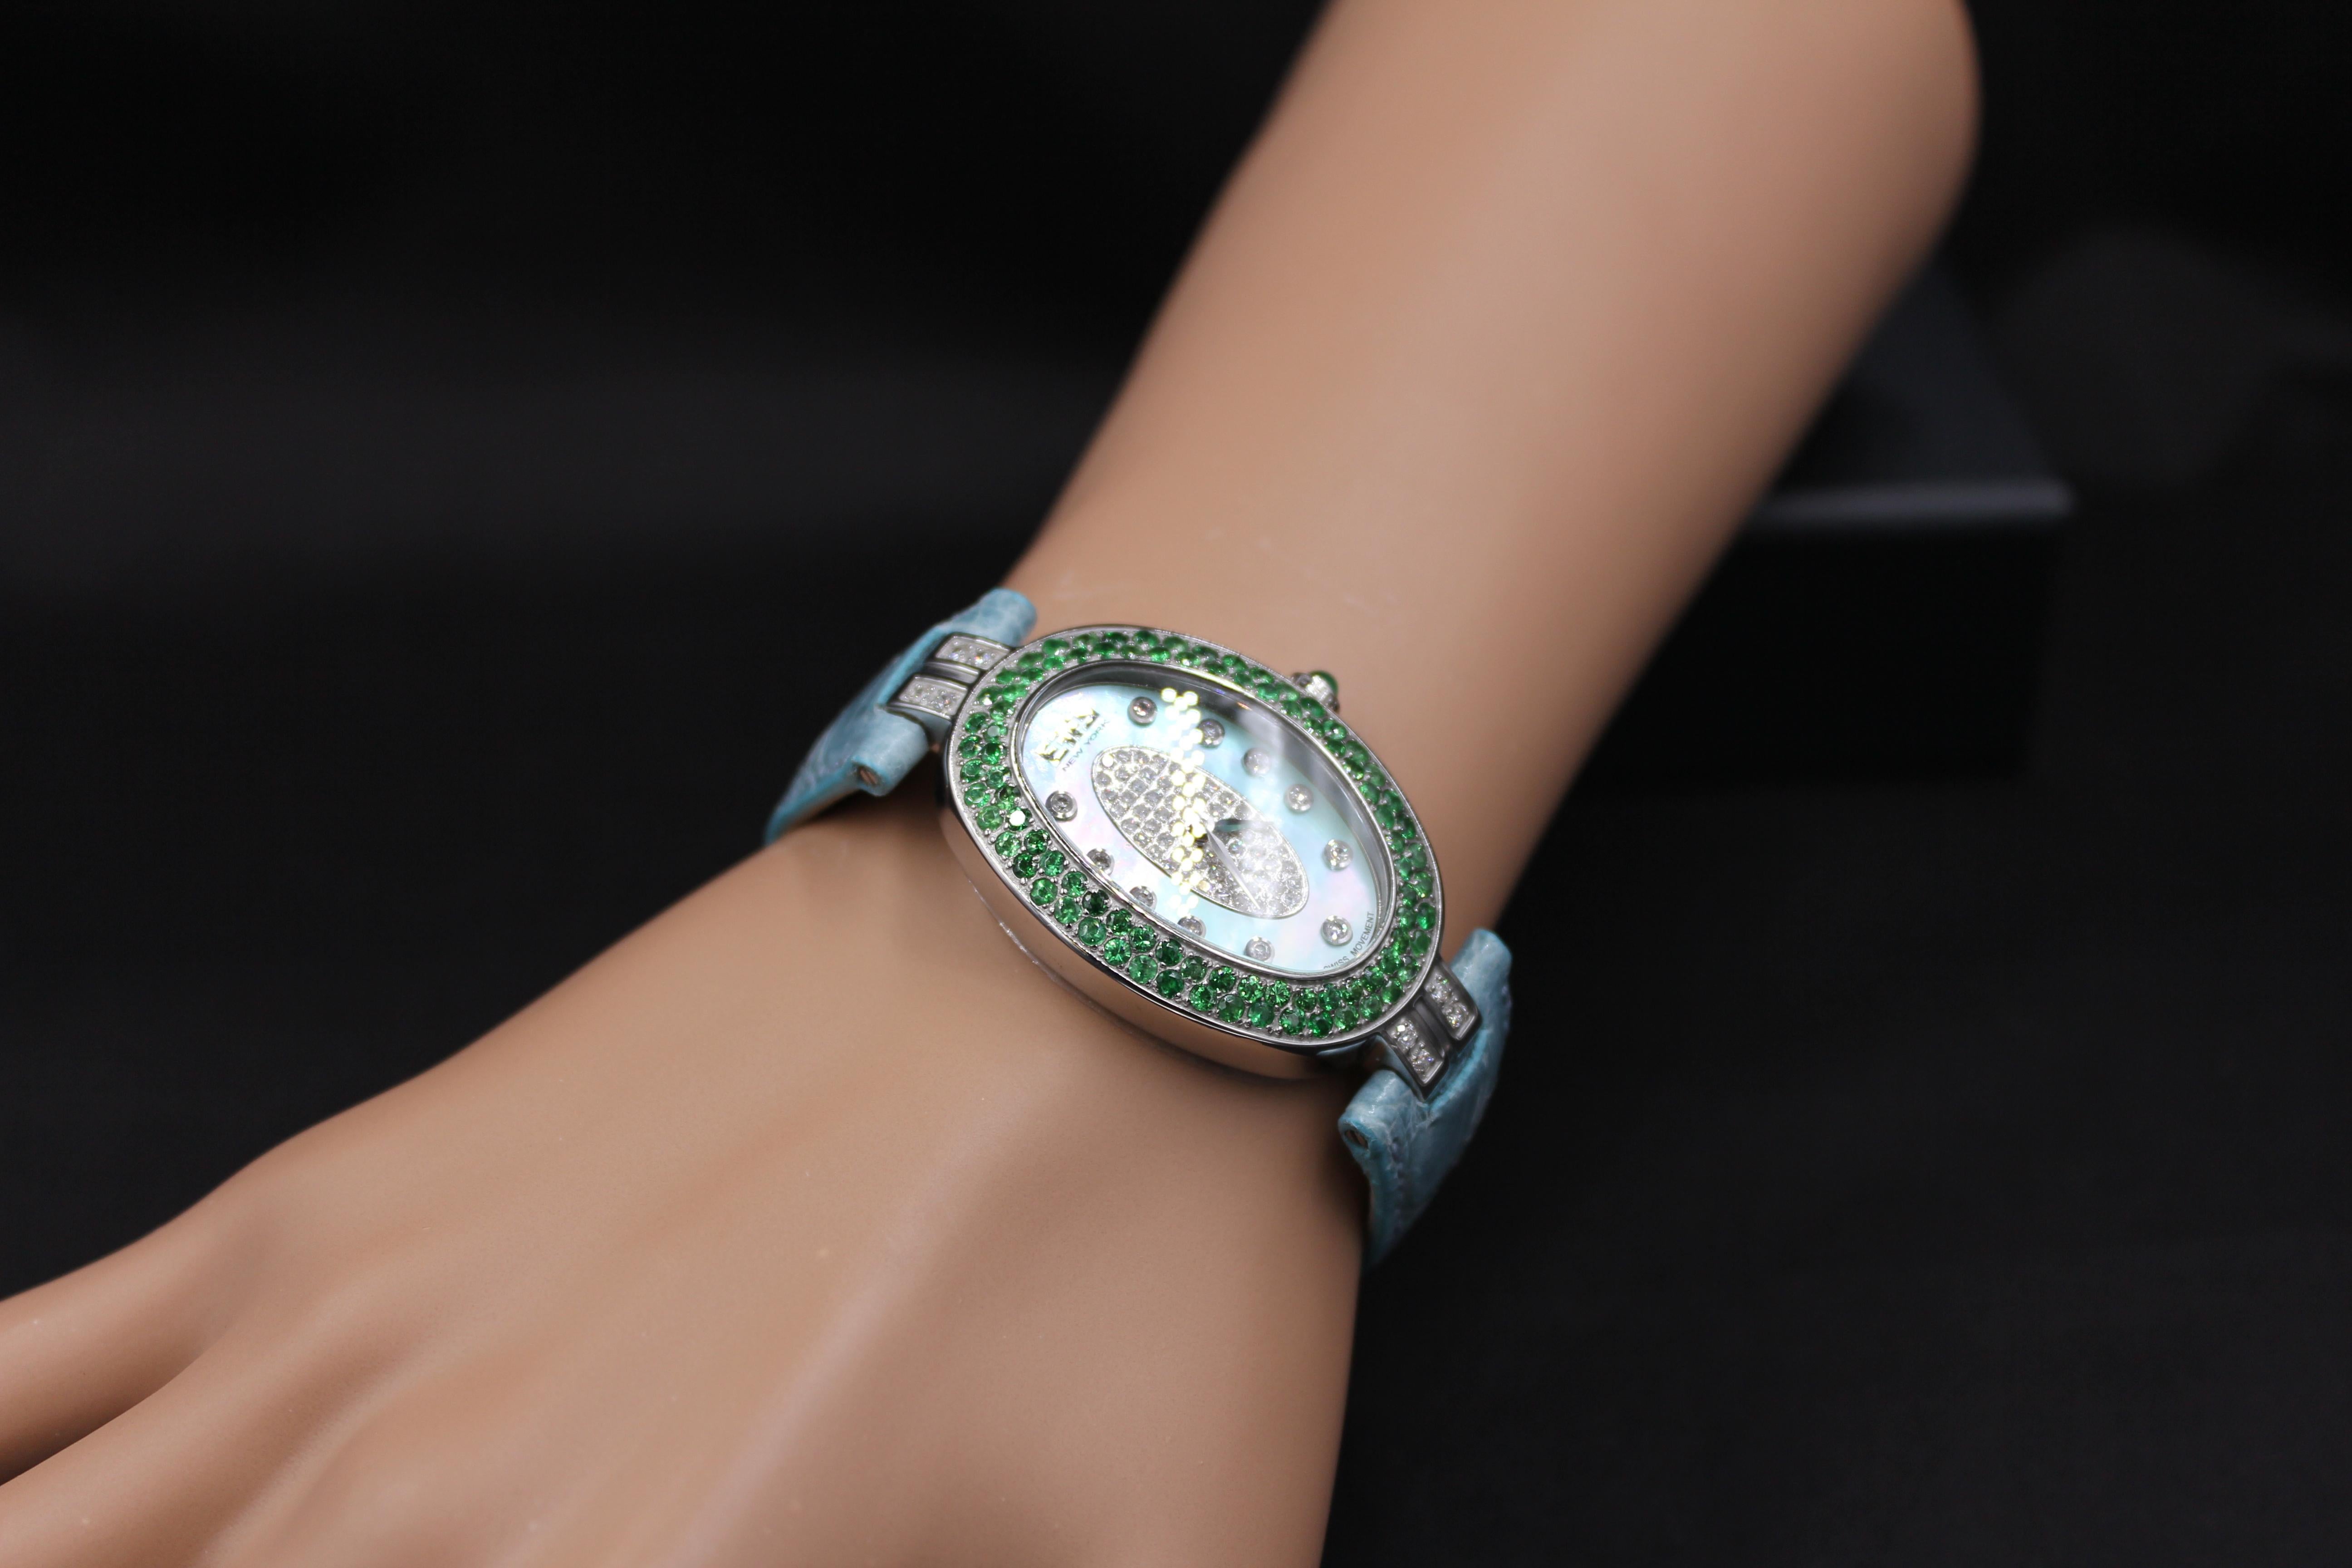 ·         Quality Swiss-Quartz movement guarantees precision timing
·         Mother-of-Pearl dial micro-paved with diamonds and gemstones enhances any dress style
·         Scratch-resistant sapphire glass lens
·         Genuine exotic crocodile